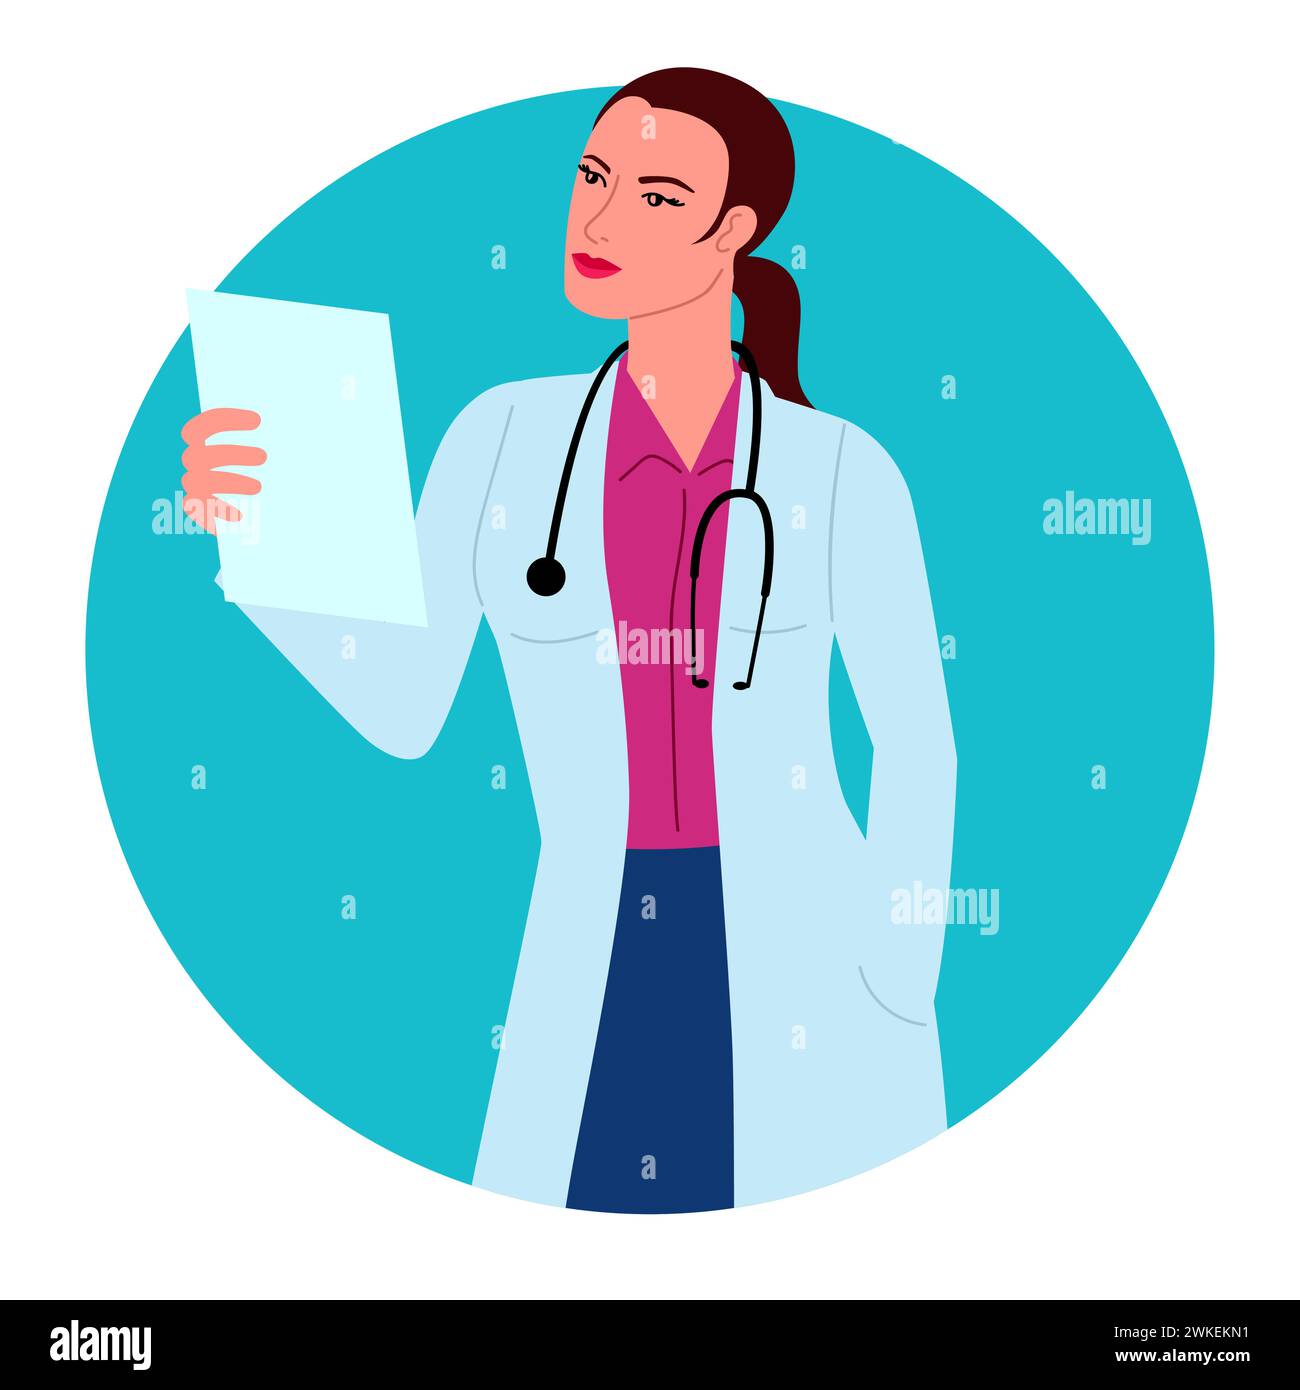 Clip art featuring a female doctor, perfect for medical presentations, healthcare brochures, and online medical resources Stock Vector